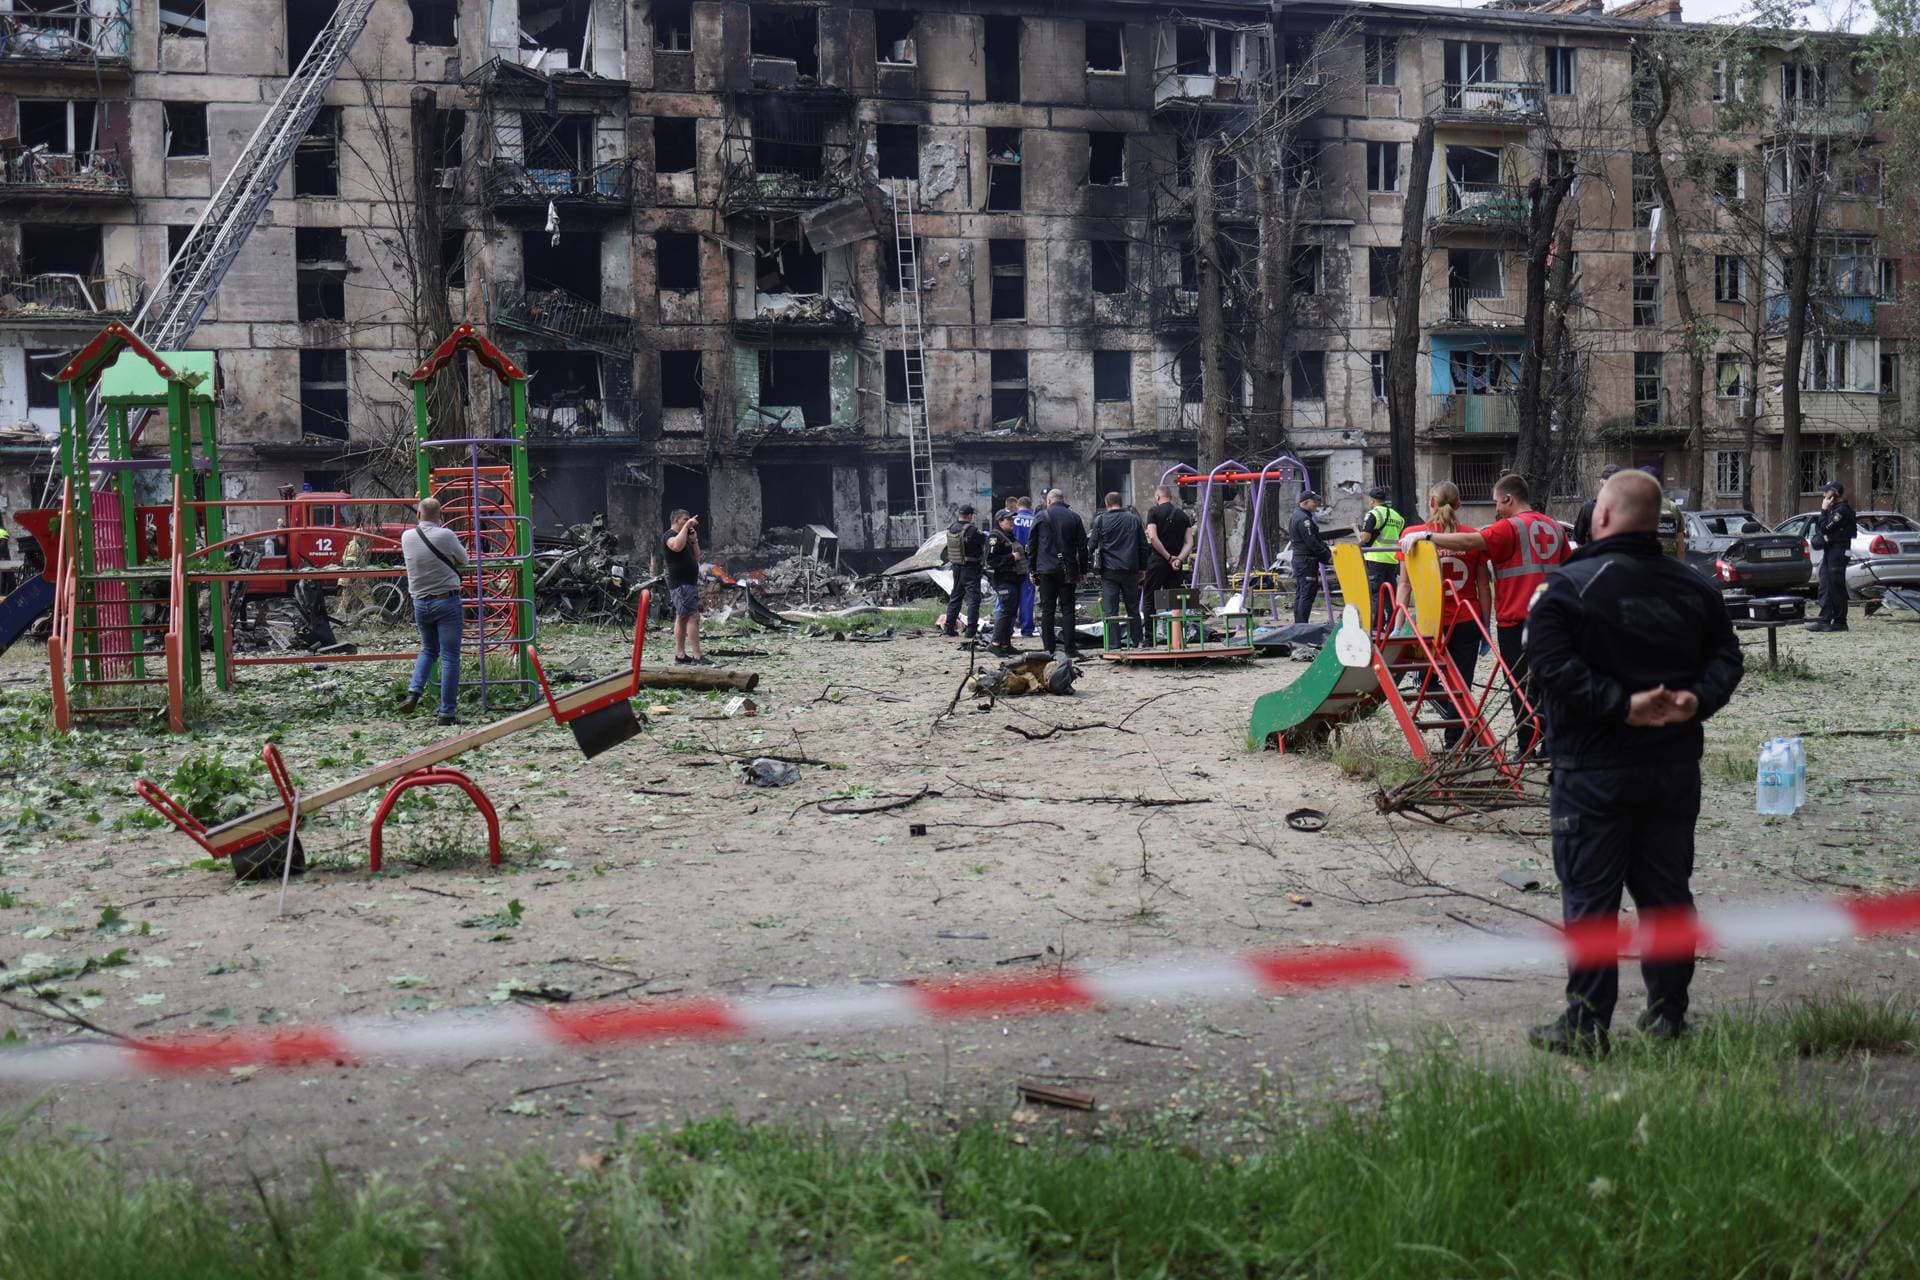 People watch the scene at a damaged multi-storey apartment building caused by the latest rocket Russian attack in Kryvyi Rih